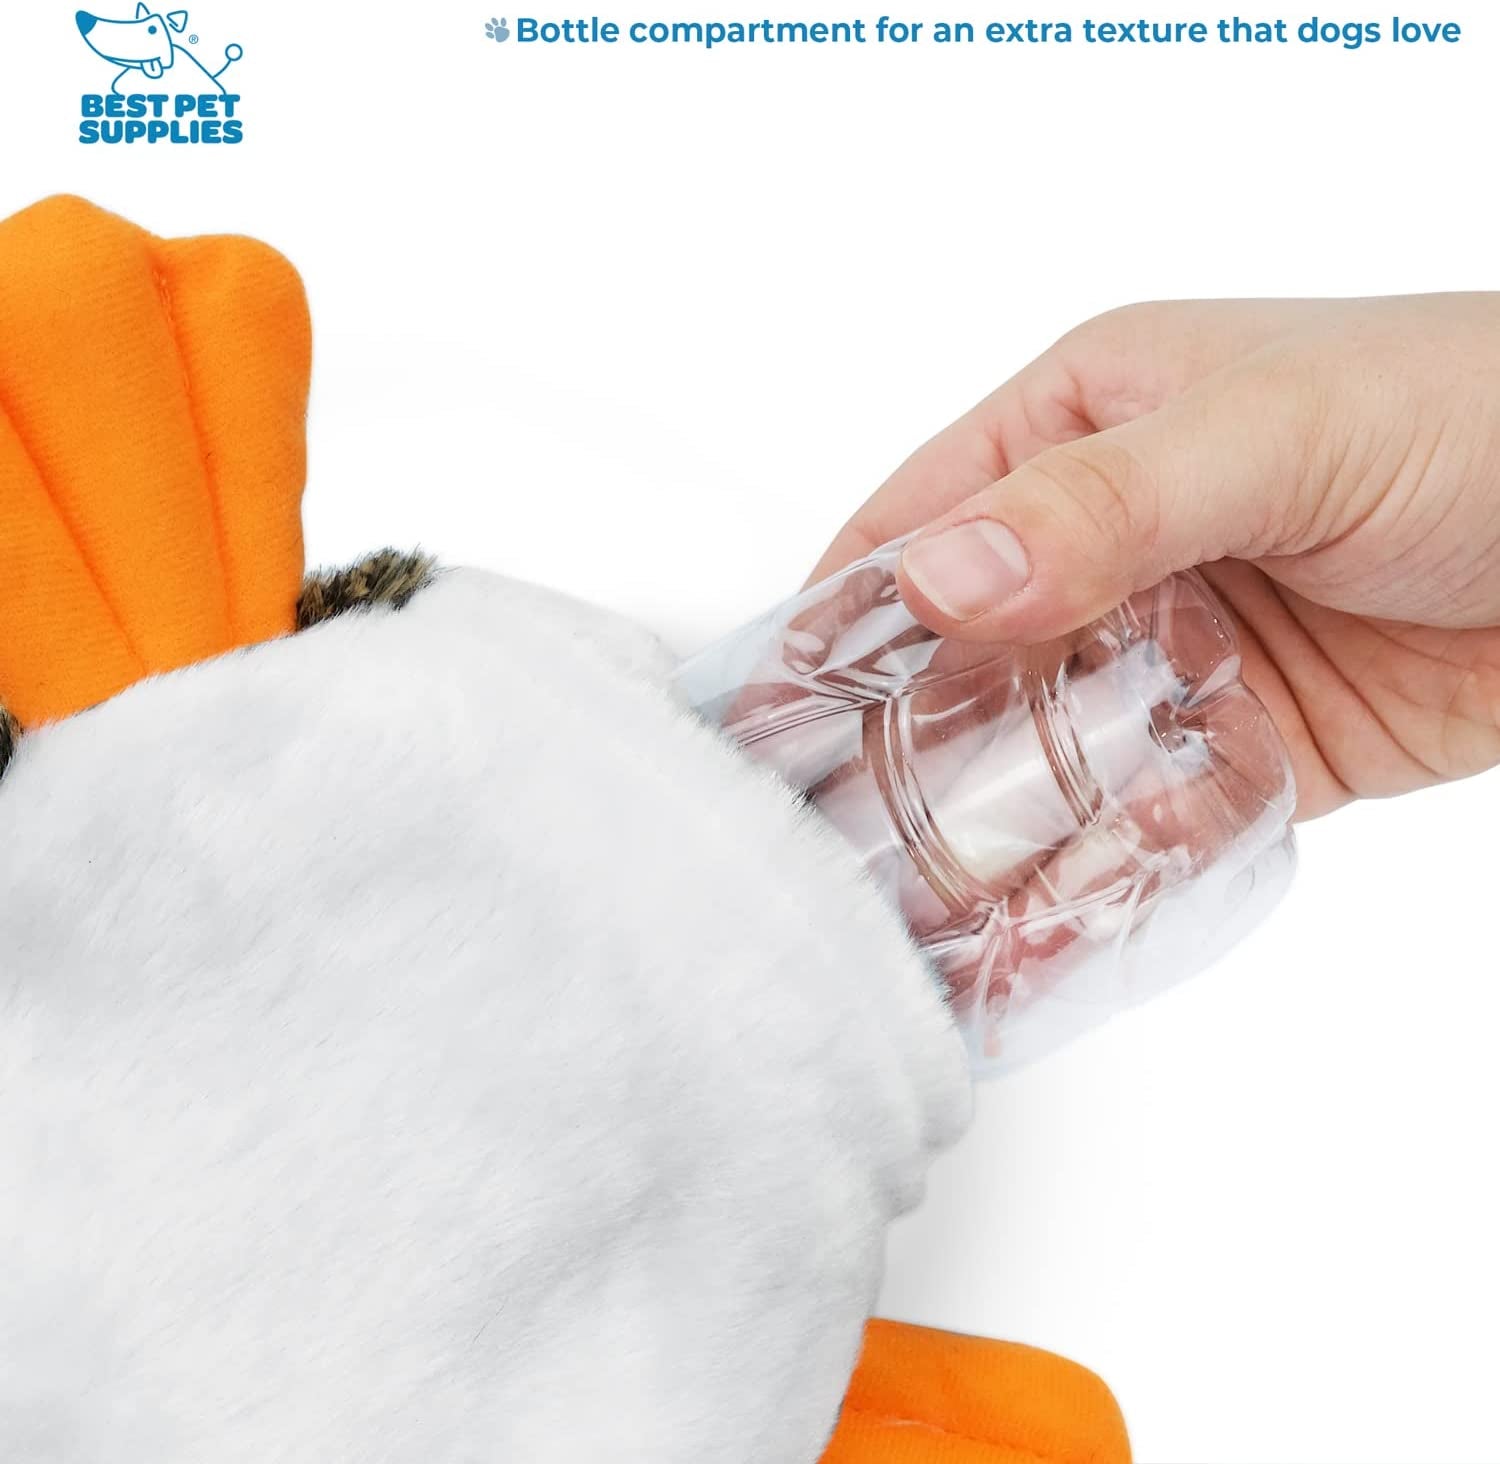 2-In-1 Stuffless Squeaky Dog Toys with Soft, Durable Fabric for Small, Medium, and Large Pets, No Stuffing for Indoor Play, Holds a Plastic Bottle